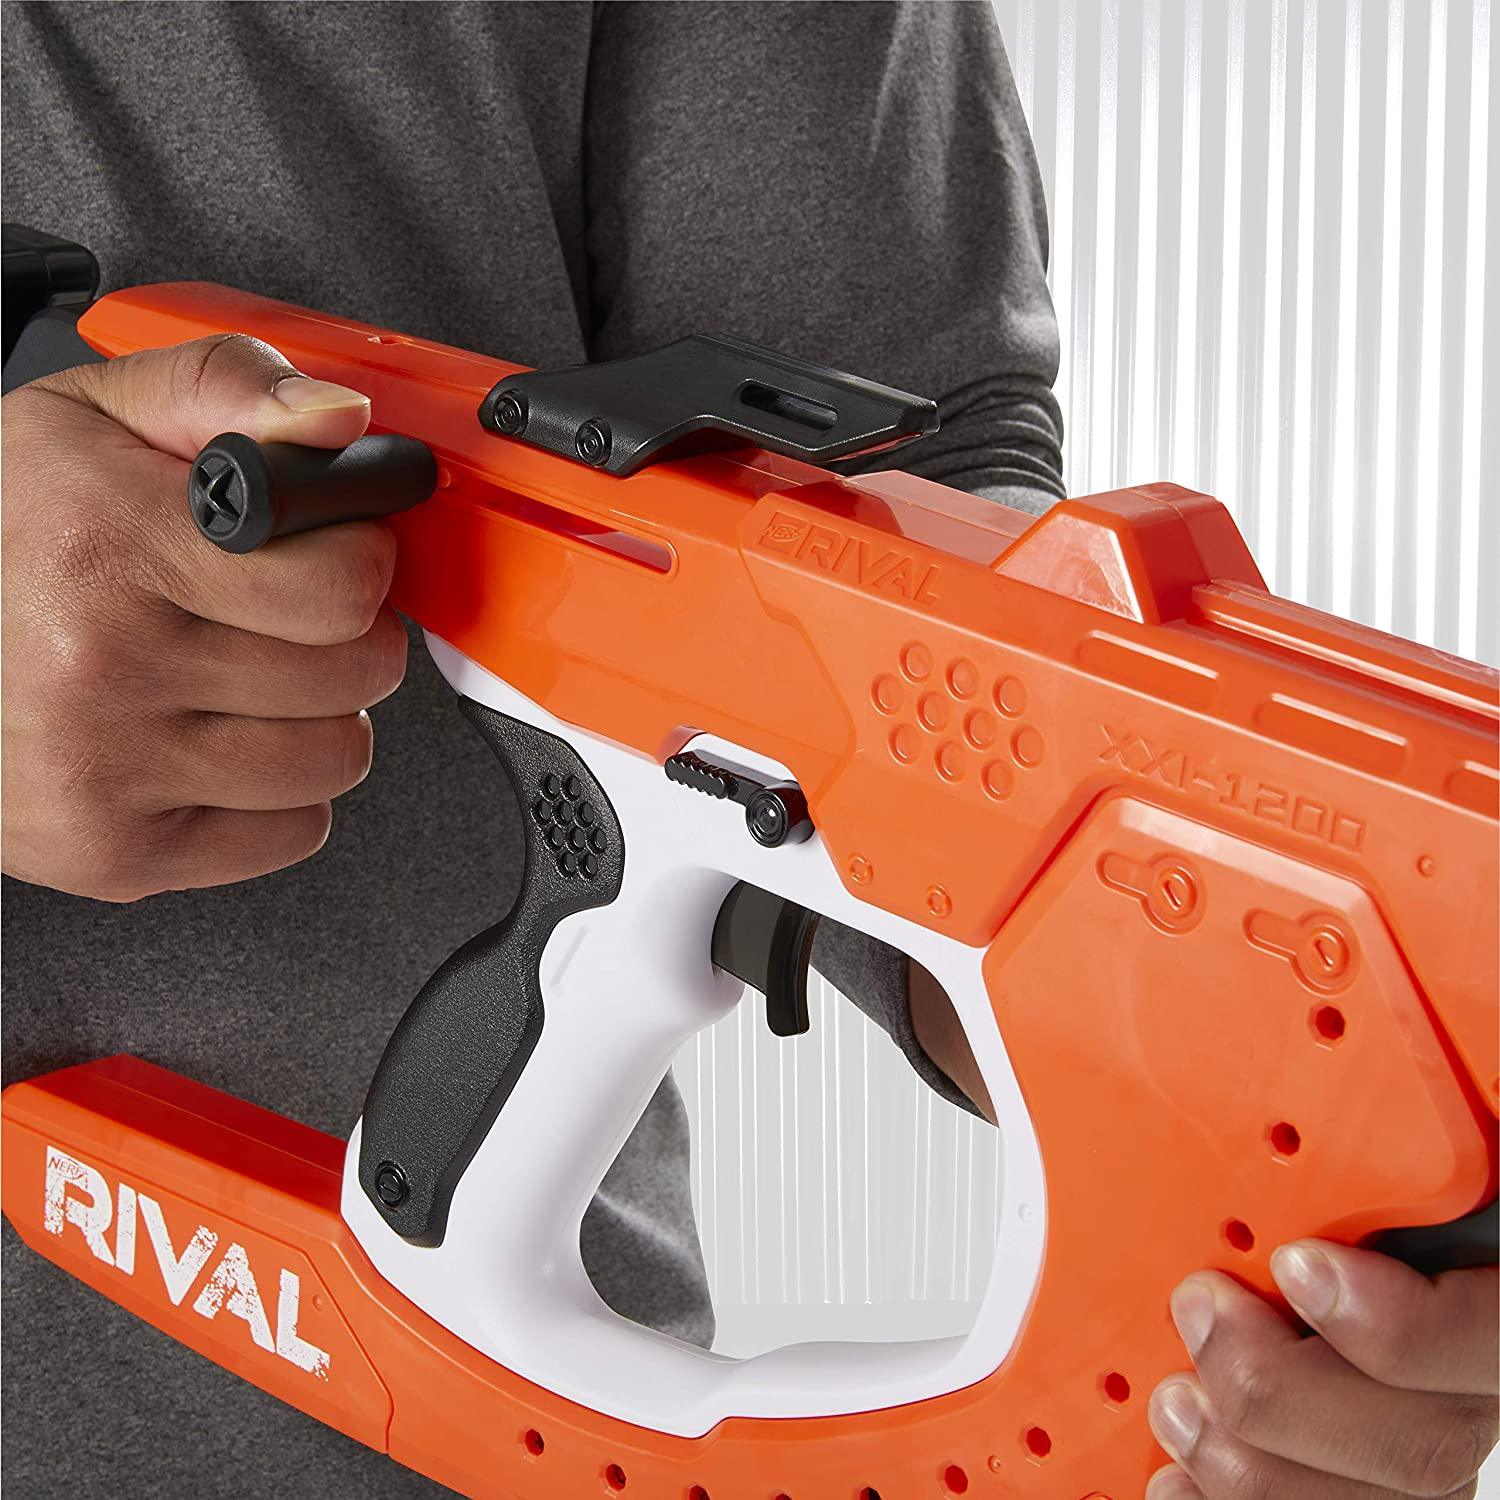 Nerf Rival Curve Shot Sideswipe XXI-1200 Blaster Fire Rounds to Curve Left, Right, Downward or Fire Straight 12 Nerf Rival Rounds - FunCorp India